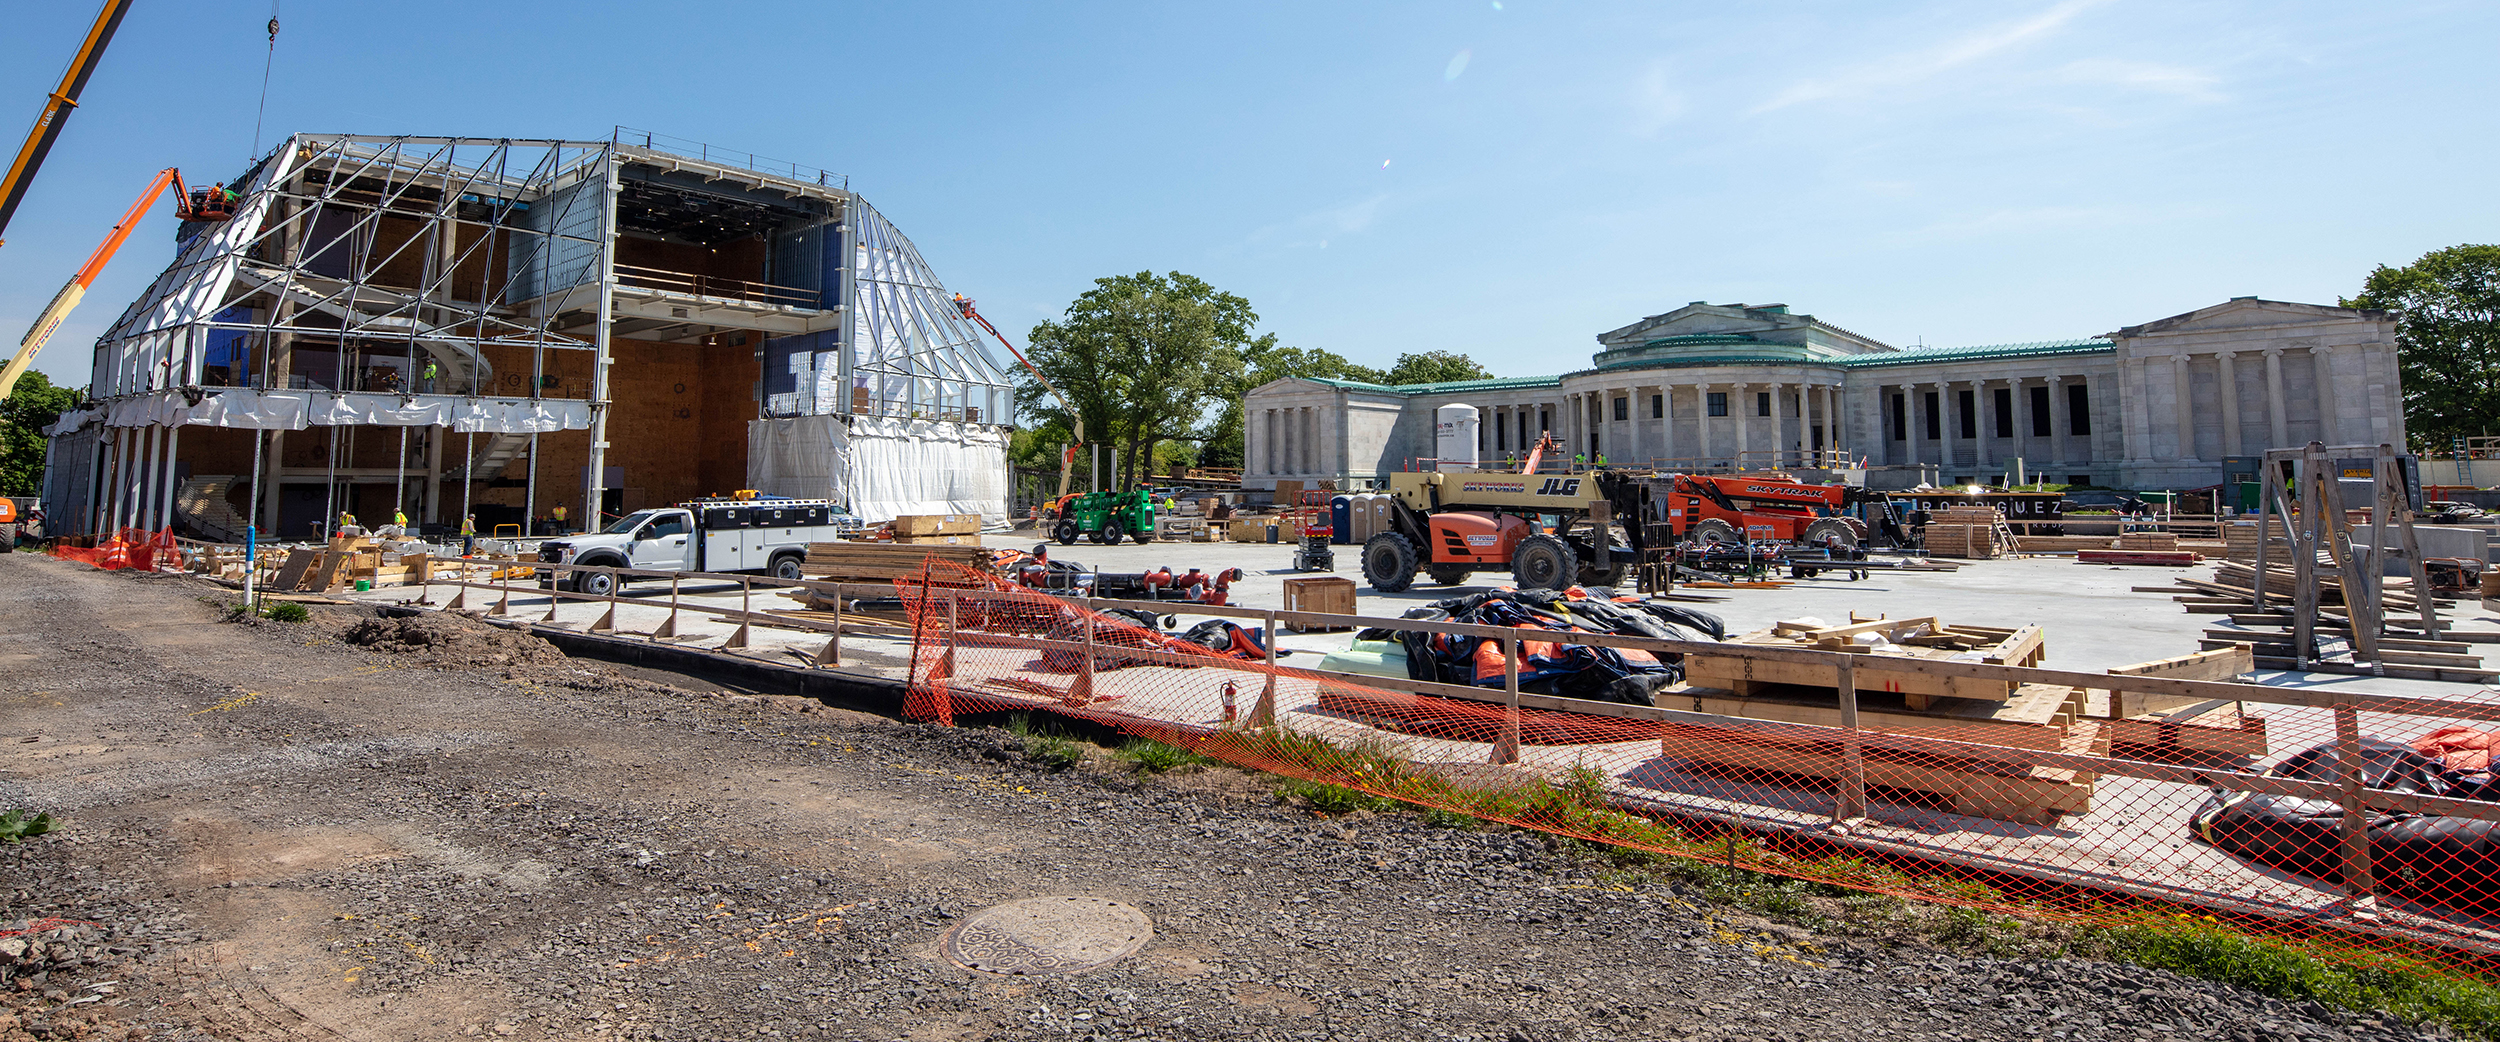 A construction site with the steel frame of a new building on the left and a white marble building with a green copper roof on the right